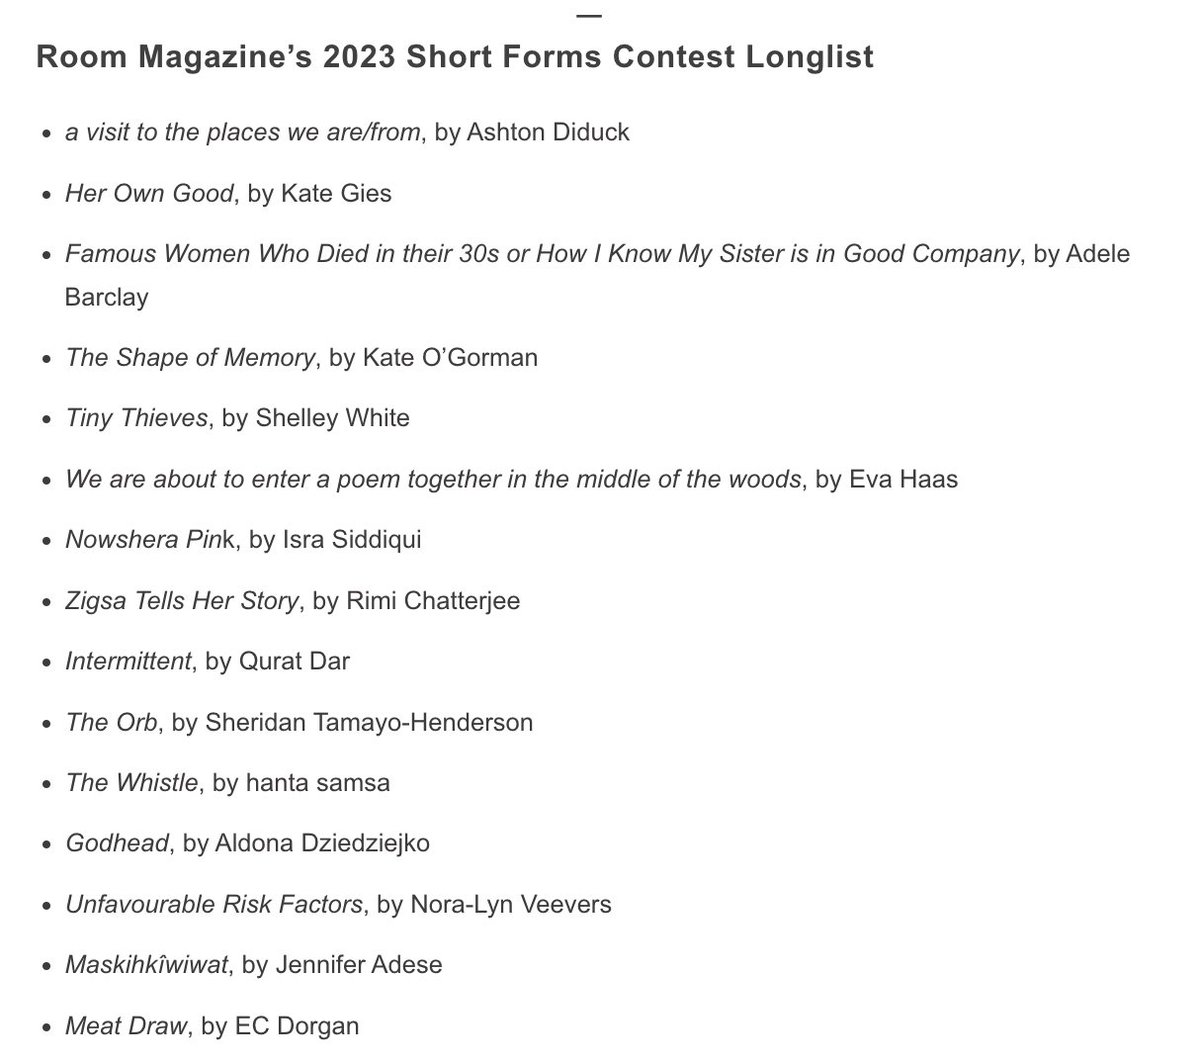 It’s finally here: announcing the longlist for our 2023 Short Forms Contest! Congrats to these poets and a huge thank you to everyone who trusted us with their work. Stay tuned for the shortlist and winners selected by the stellar Tsering Yangzom Lama! roommagazine.com/short-forms-co…